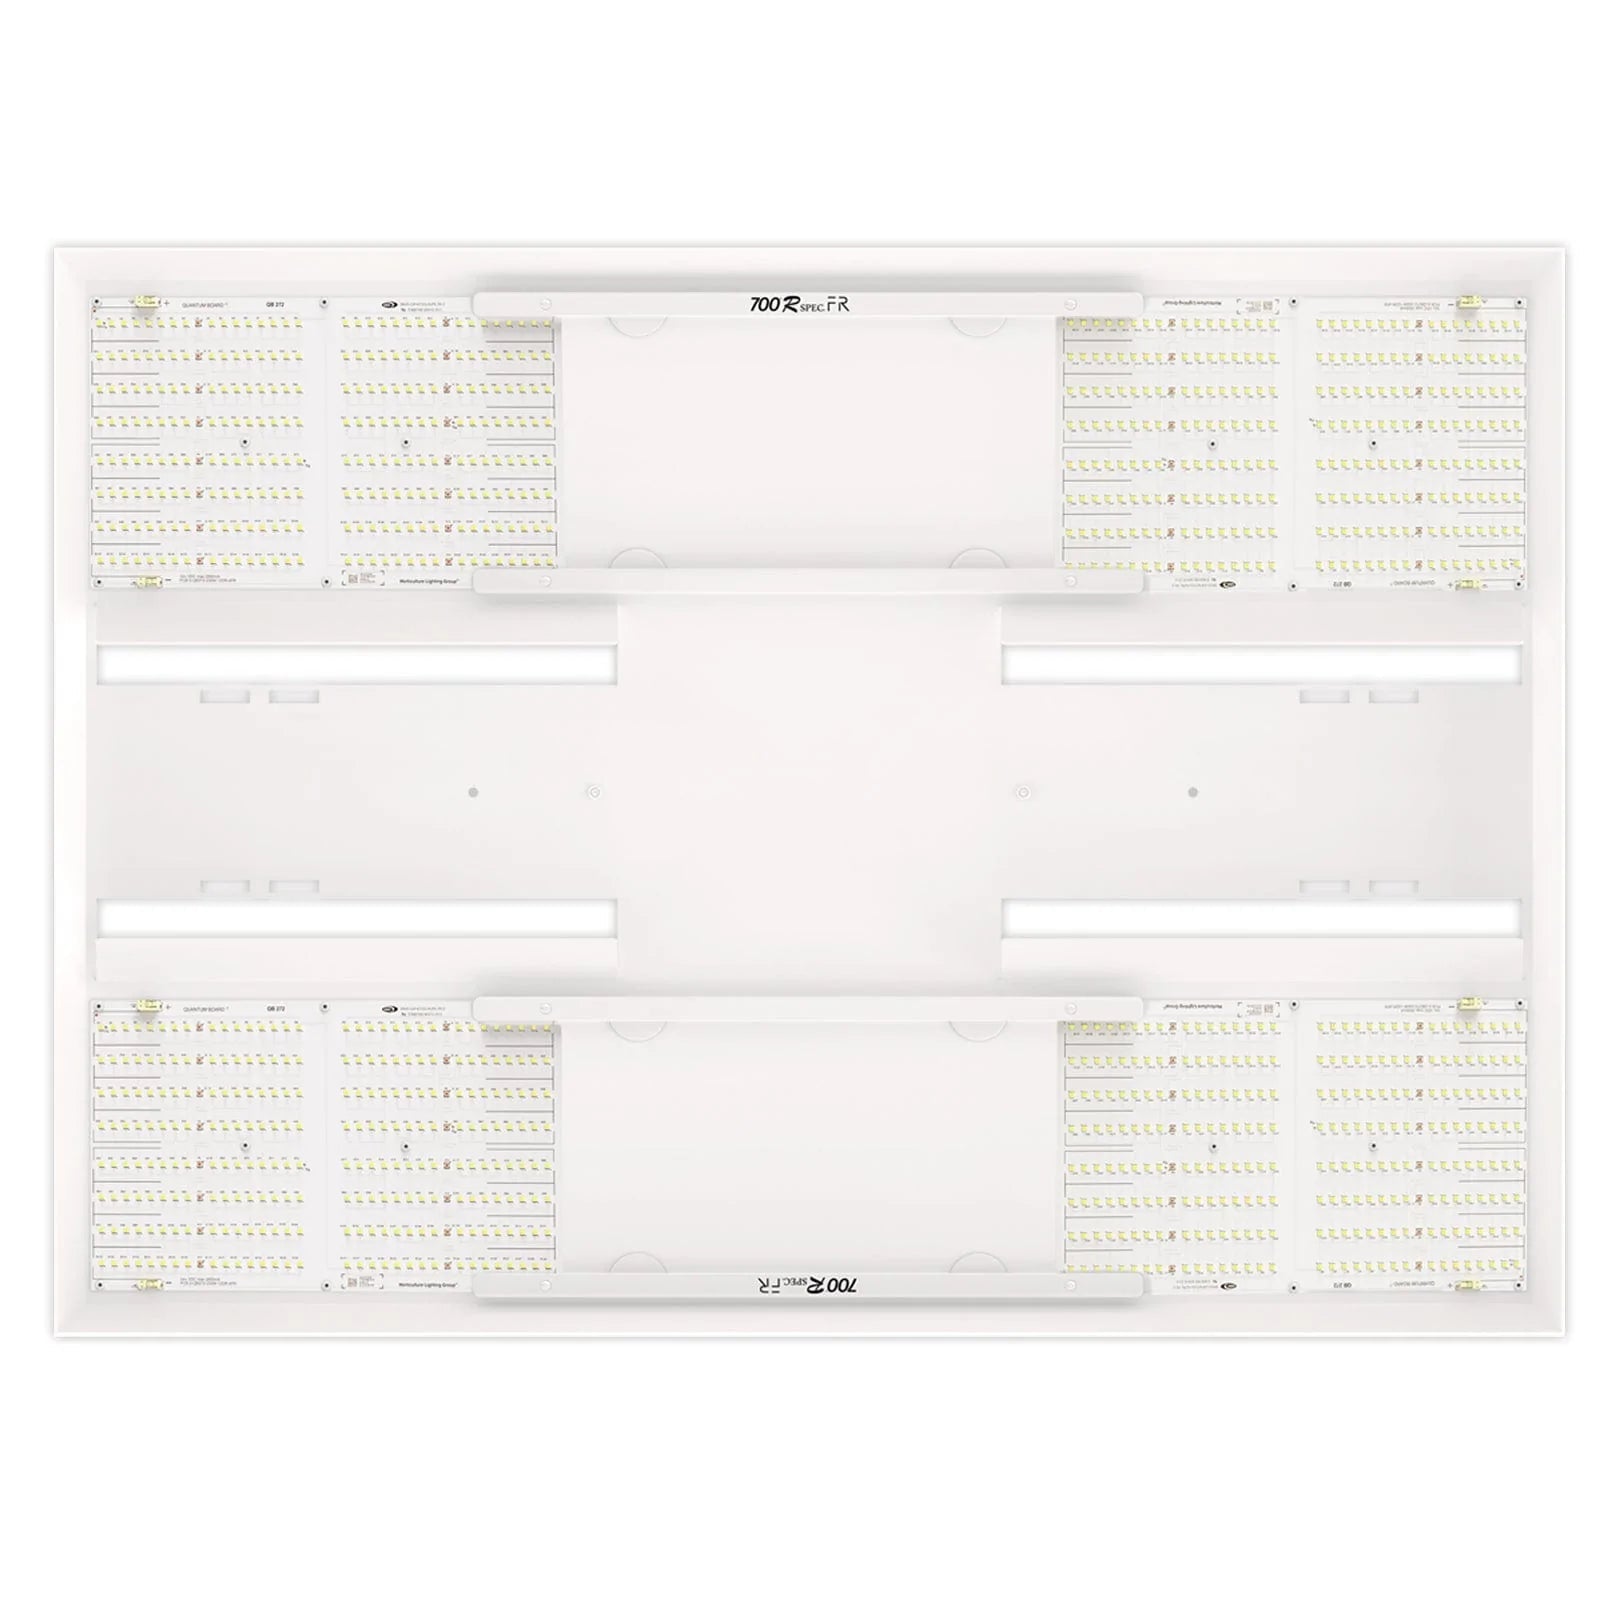 HLG 700 Rspec FR LED Grow Light 5' x 5' - Horticulture Lighting Group - Happy Hydro